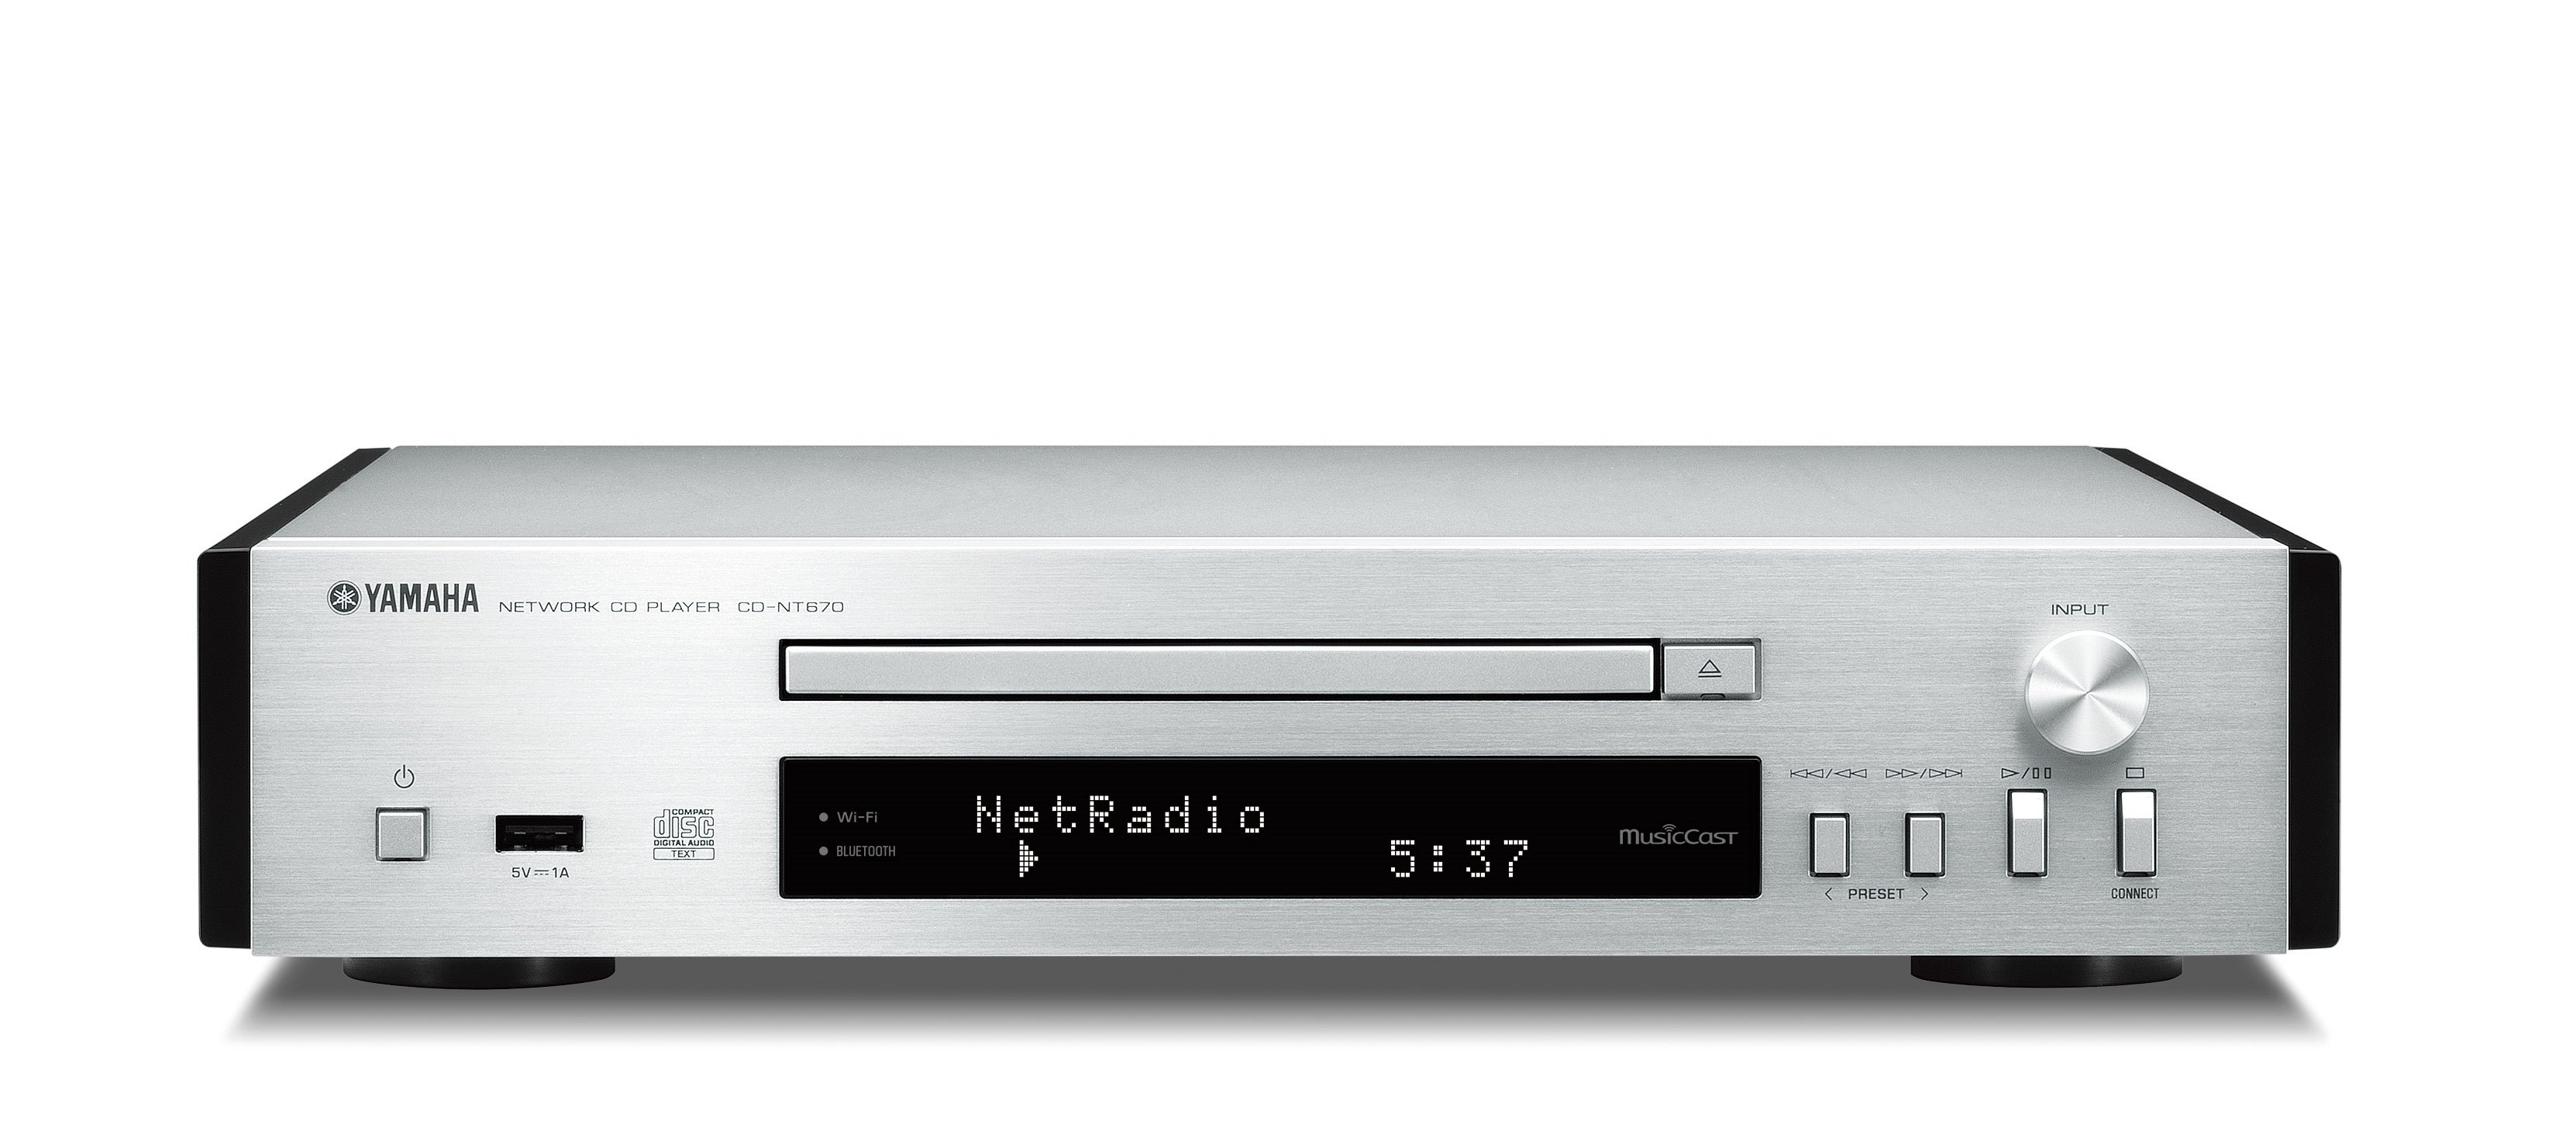 MusicCast CD-NT670 - Overview - HiFi Components - Audio & Visual 